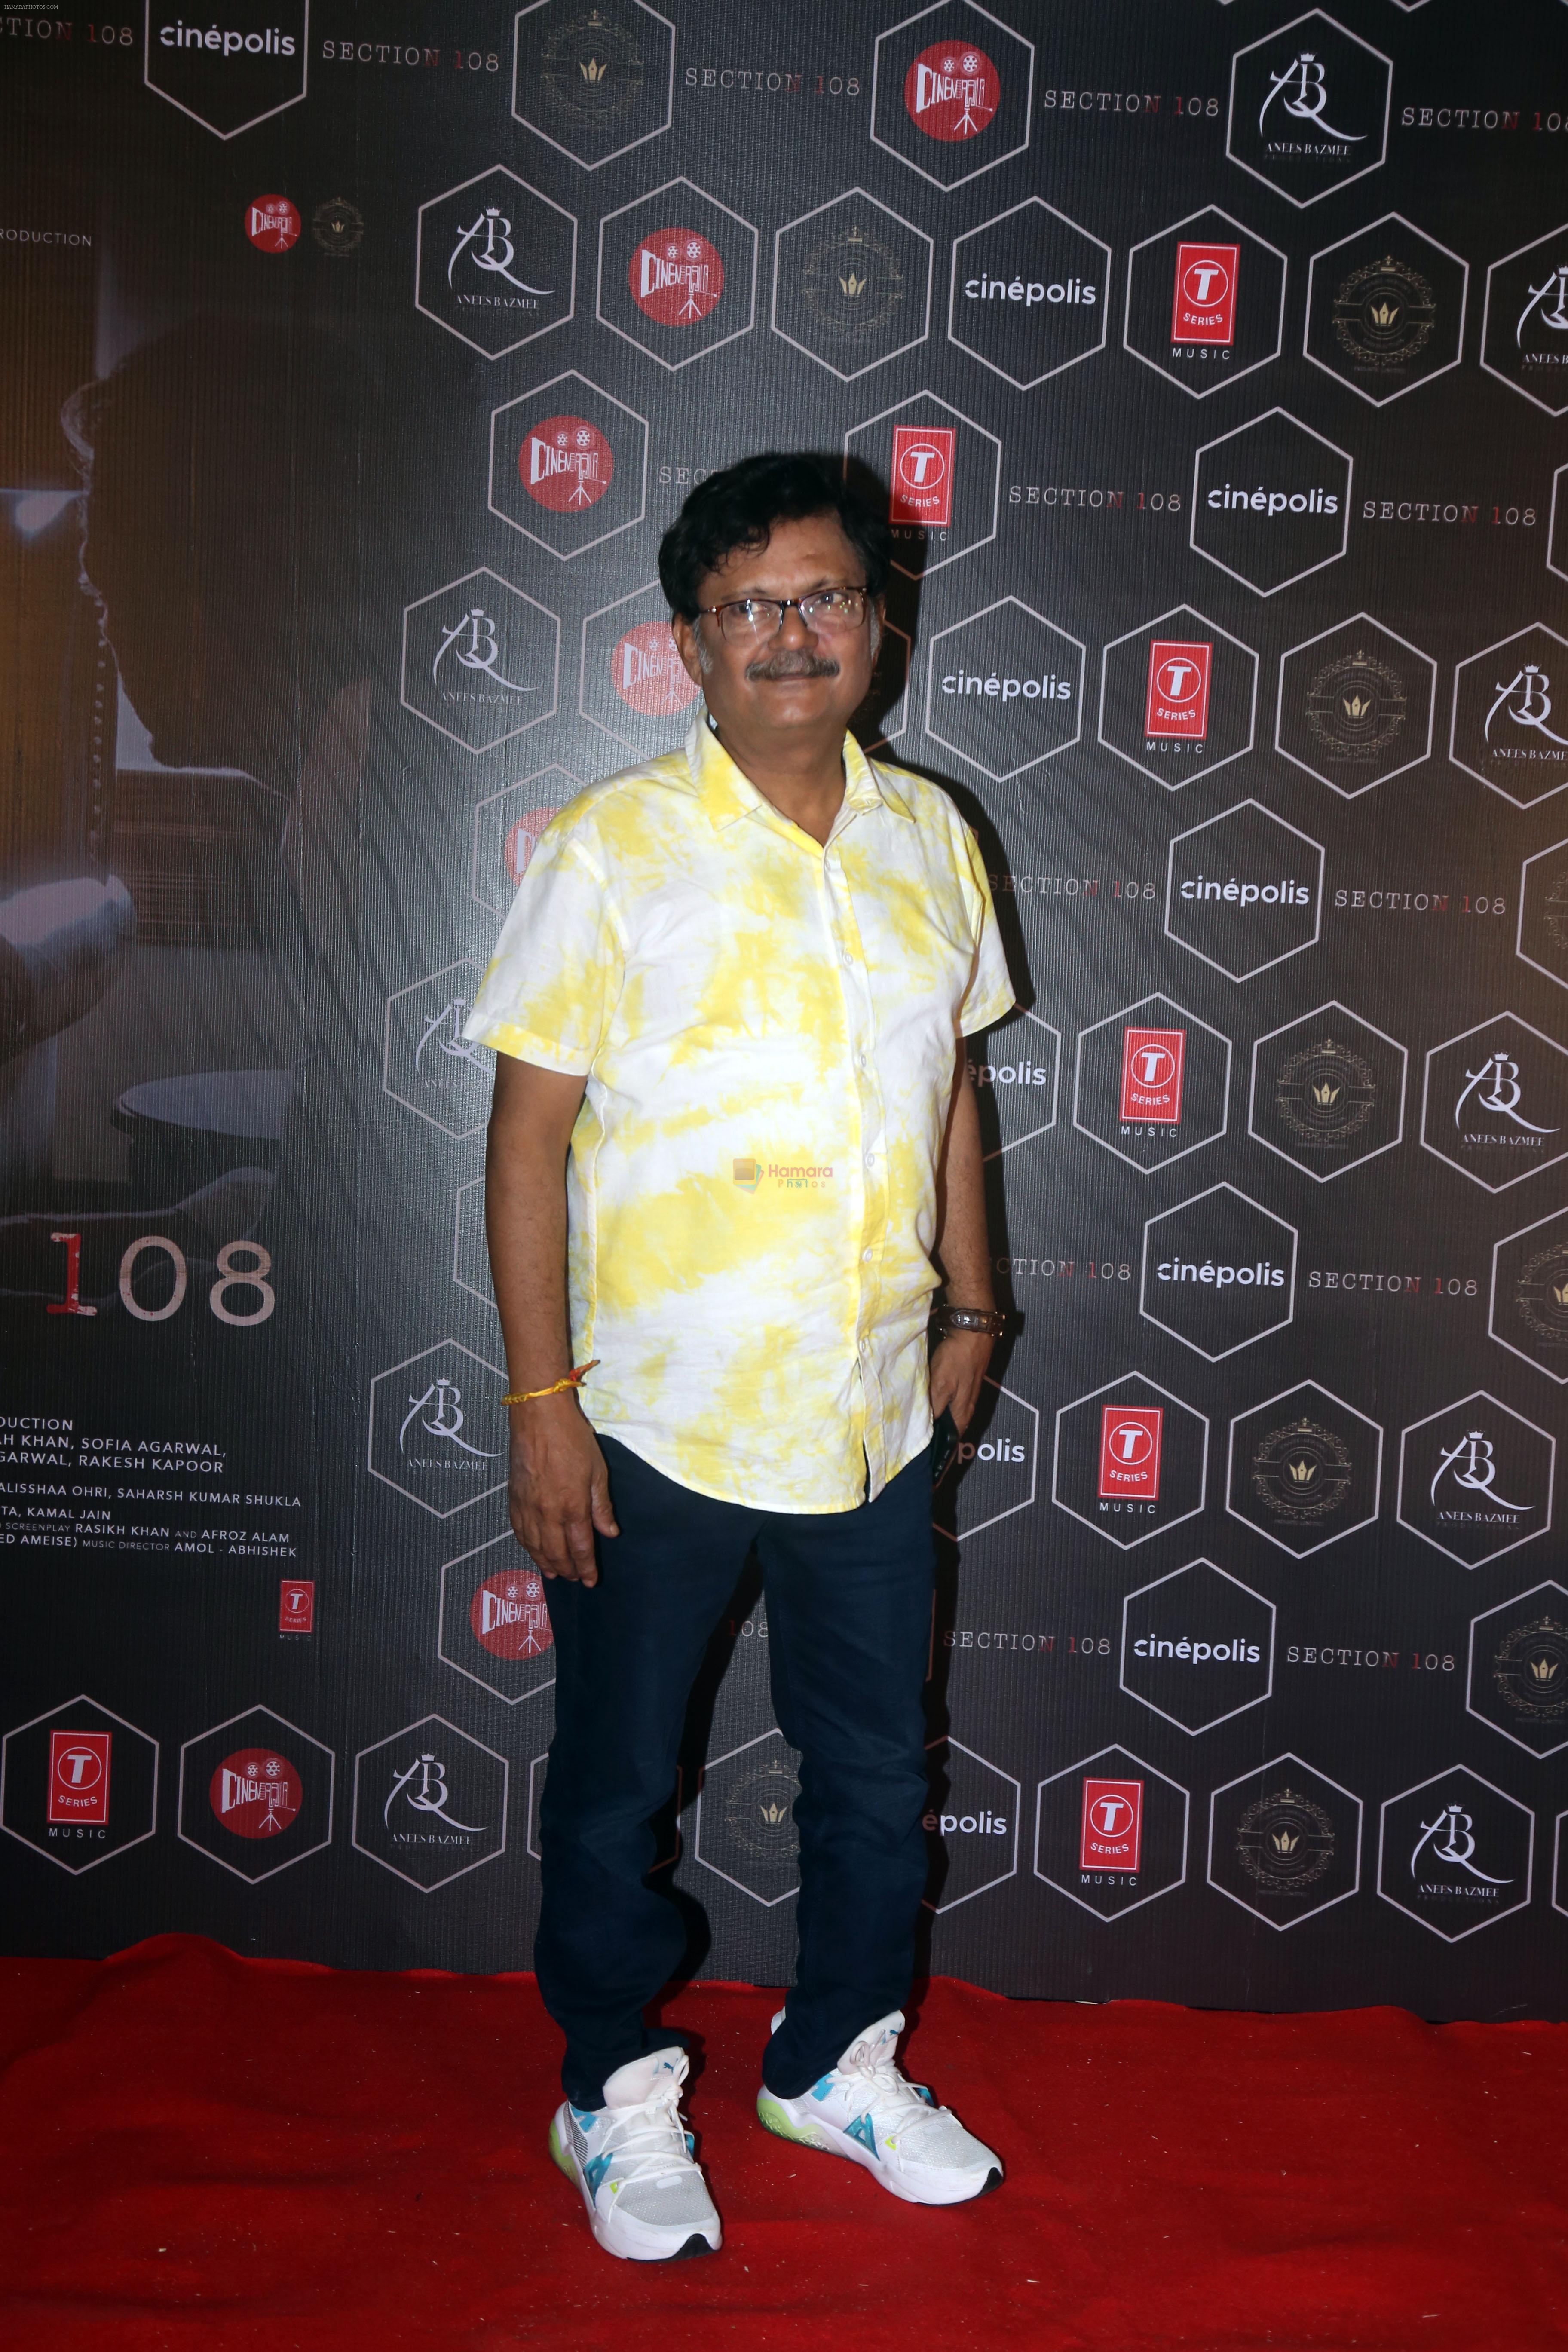 Atul Srivastava at the launch of film Section 108 Teaser on 27th August 2023